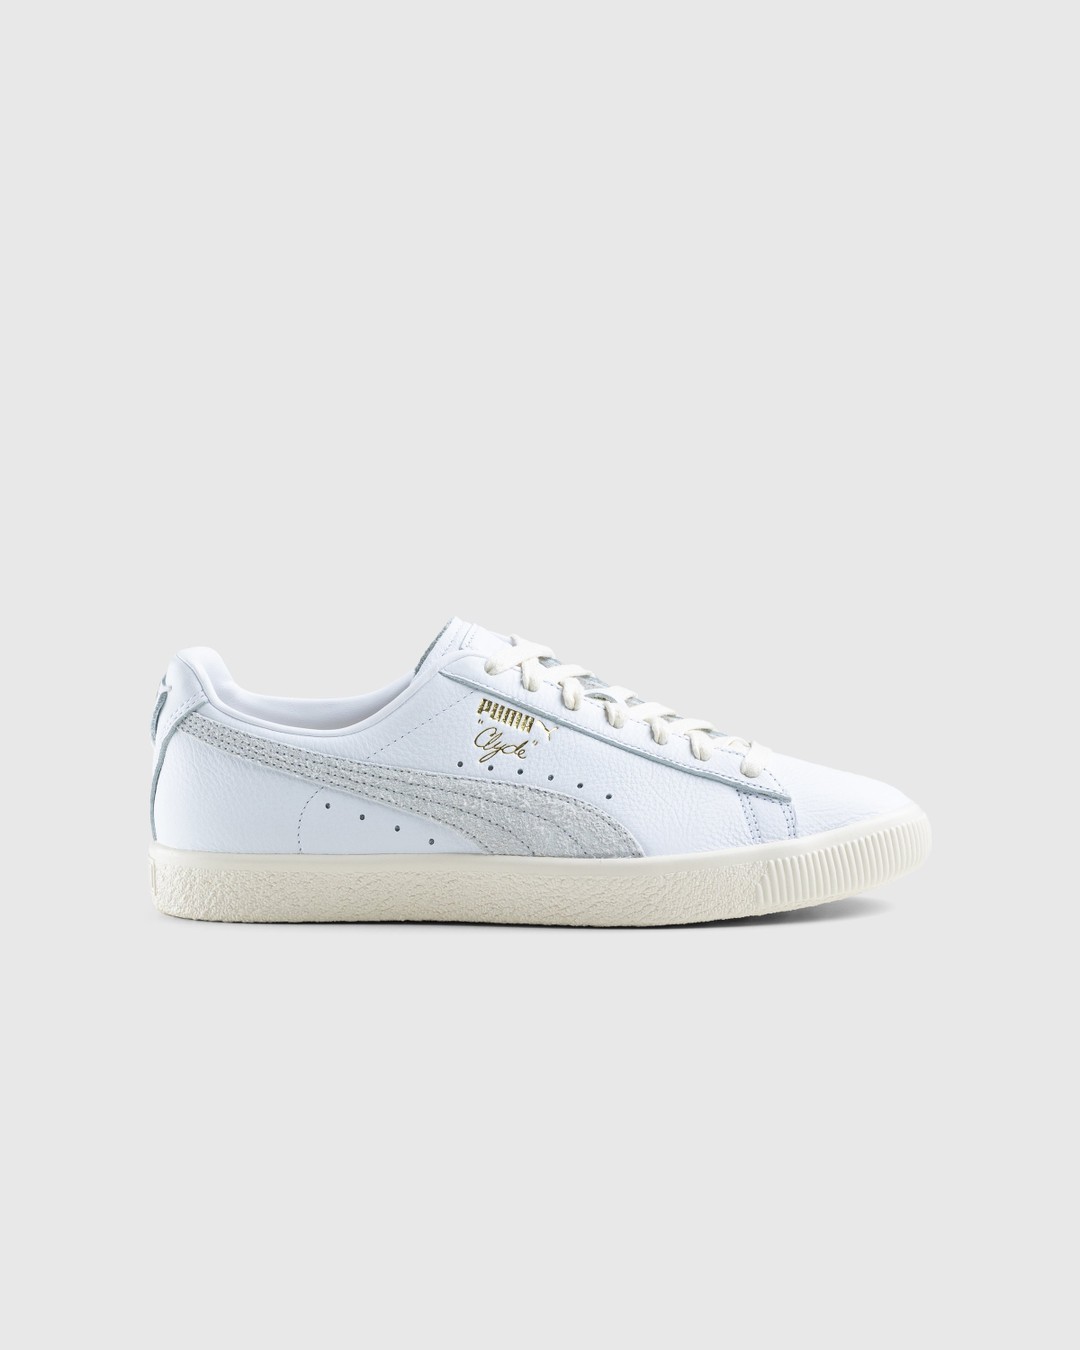 Puma – Clyde Base White - Sneakers - White - Image 1